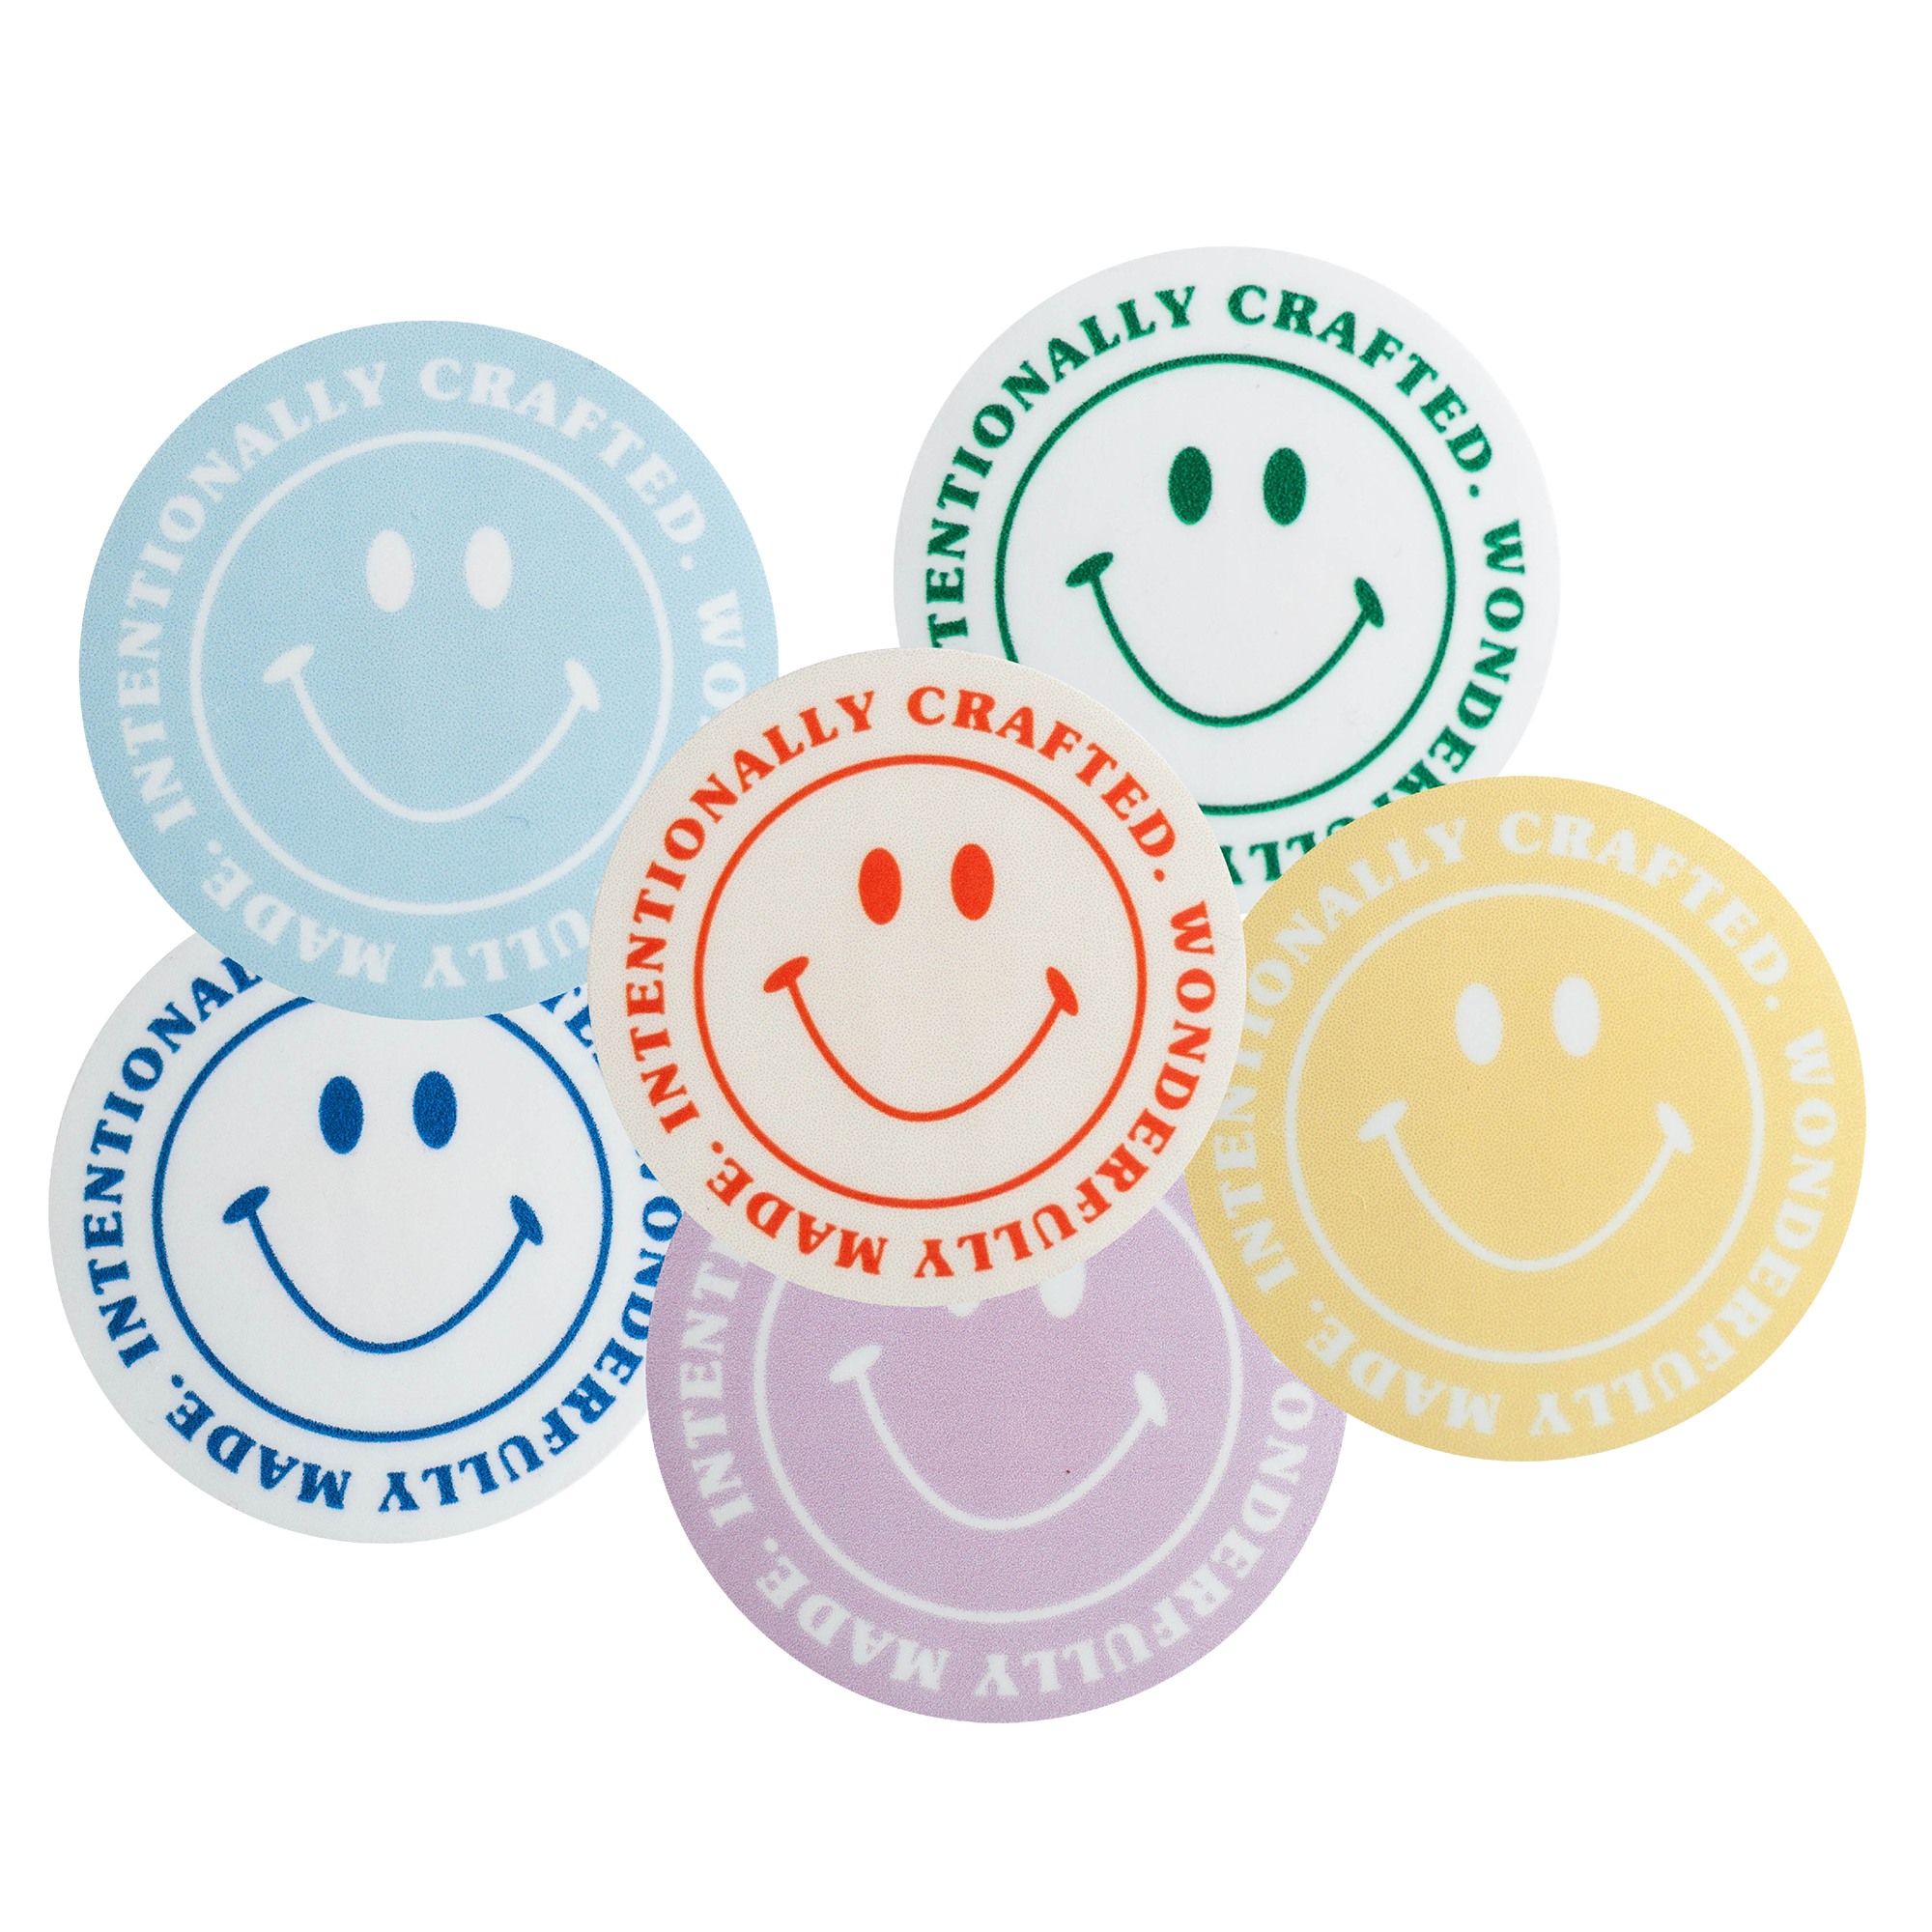 SMILEY STICKERS – WAY